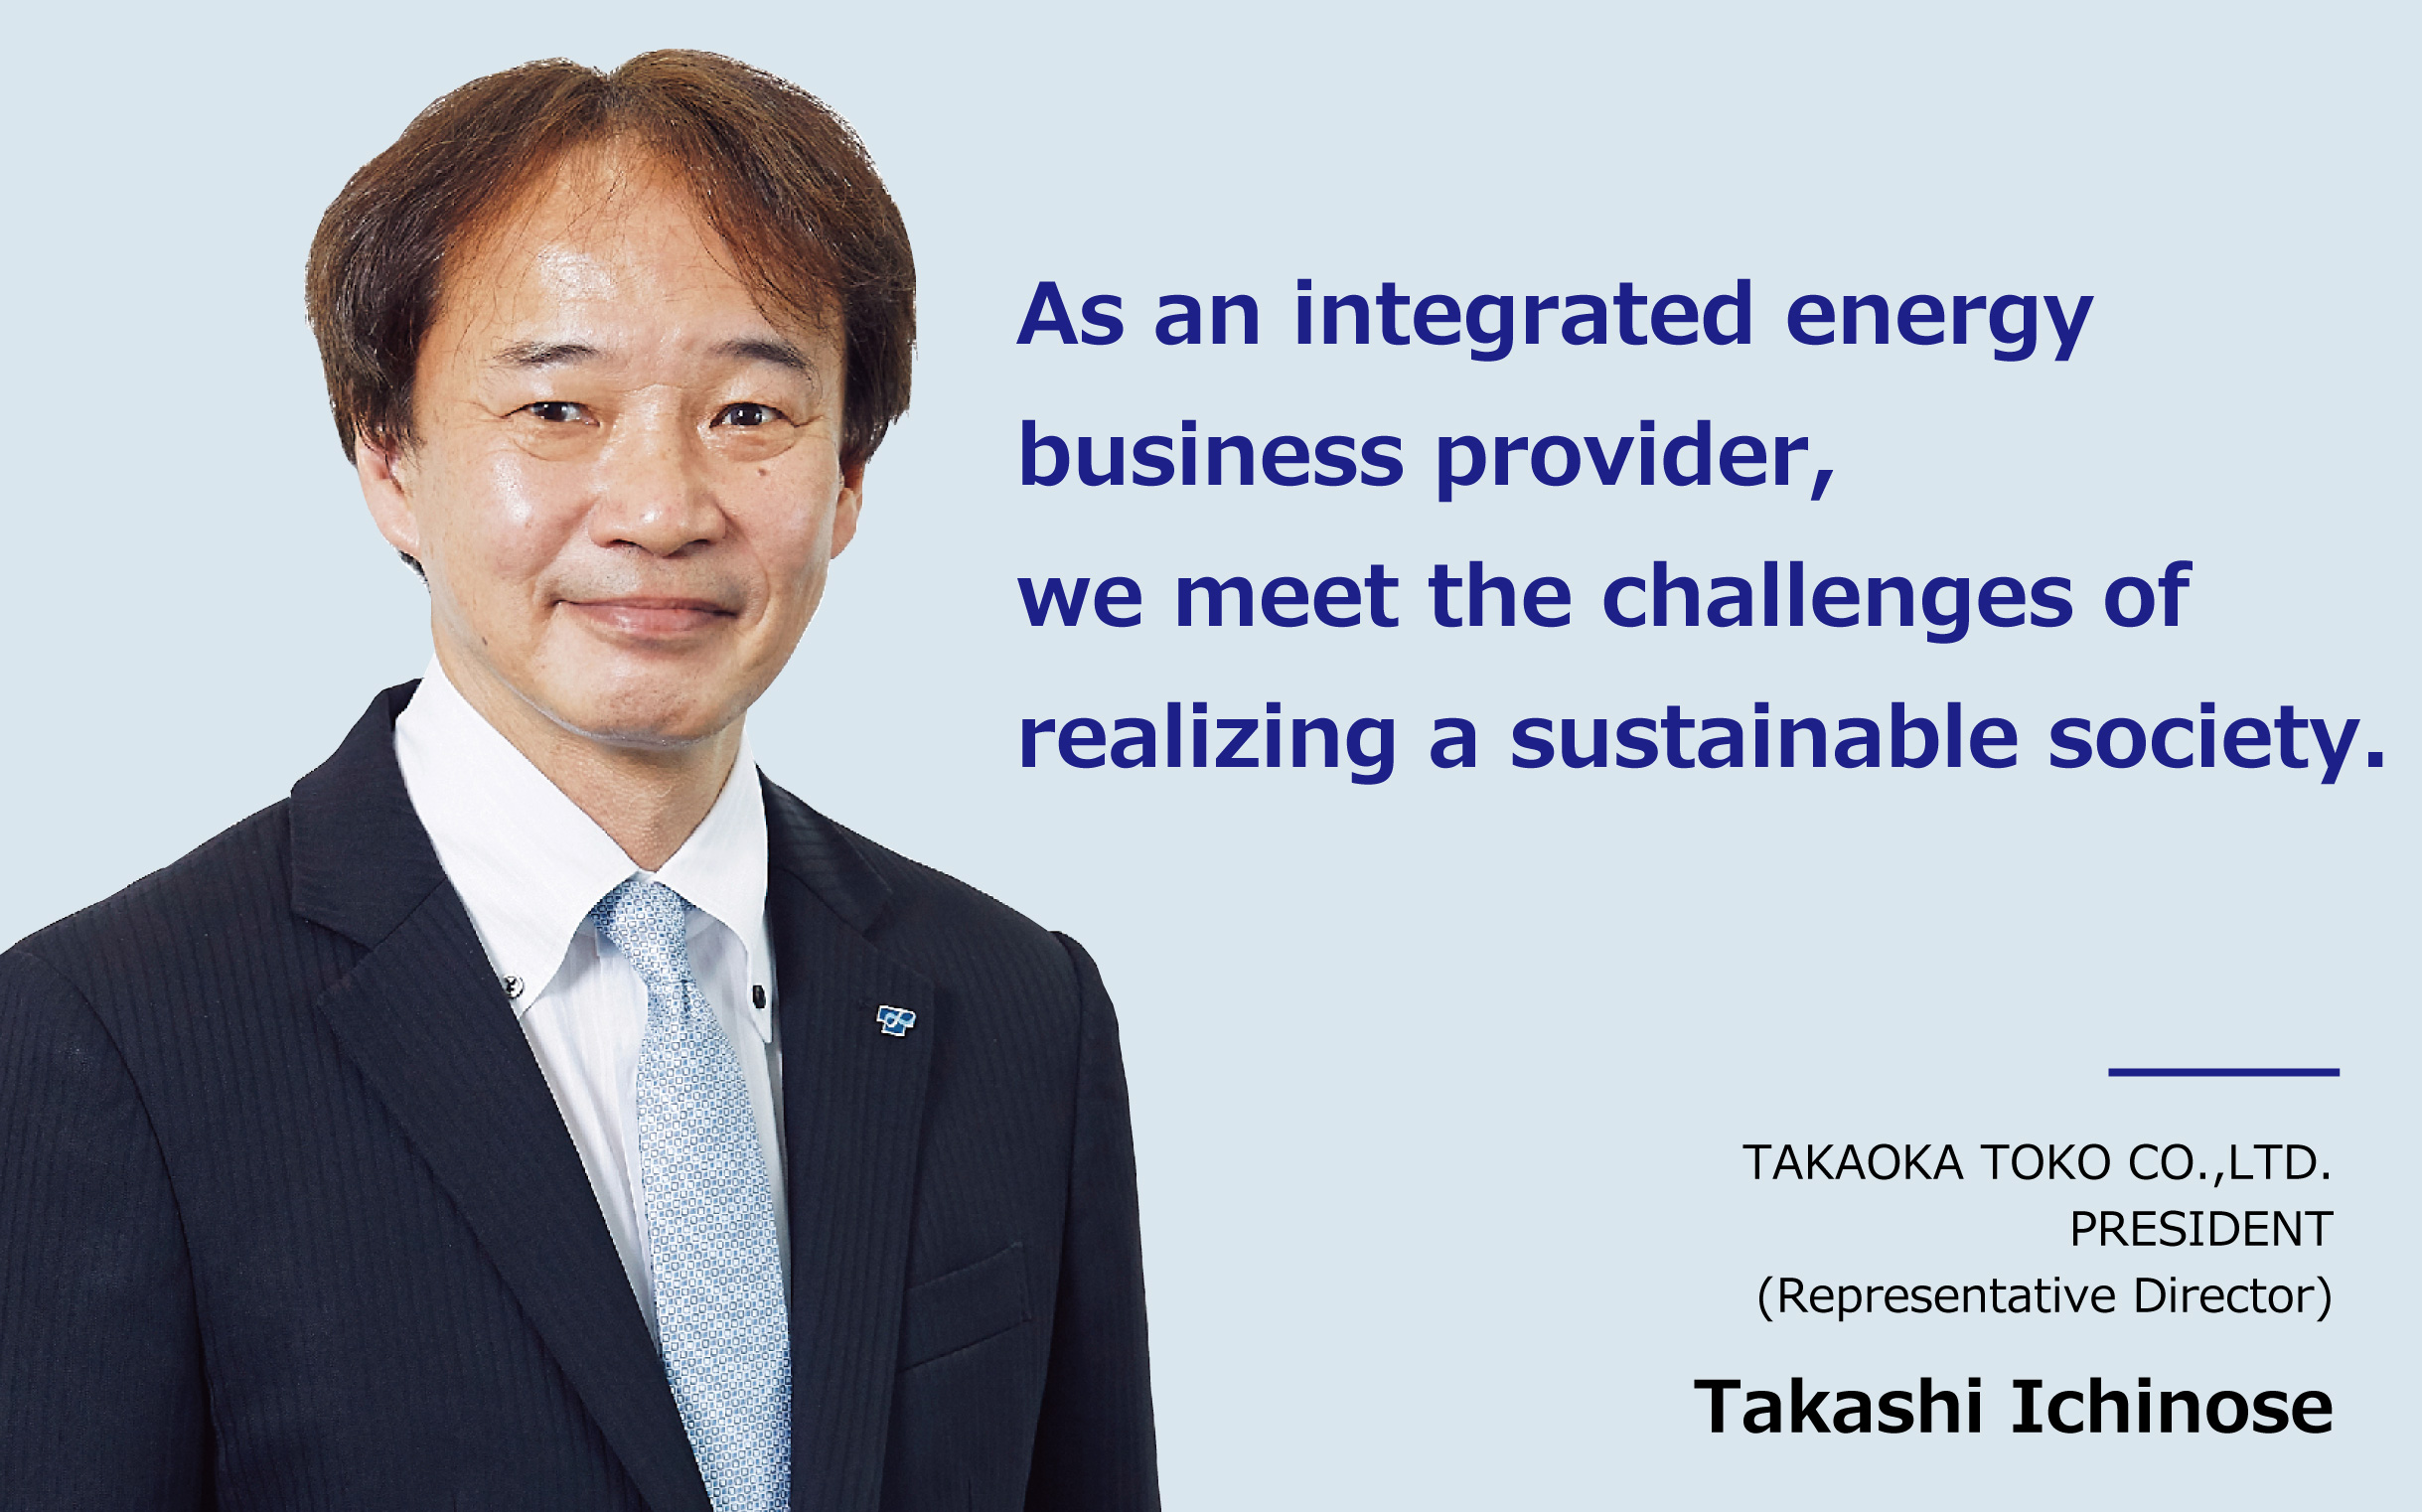 Toward the Future, Toward the world The TAKAOKA TOKO Group will continue to meet challenges together with our customers. TAKAOKA TOKO CO.,LTD. PRESIDENT(Representaive Director) Toshiro Takebe